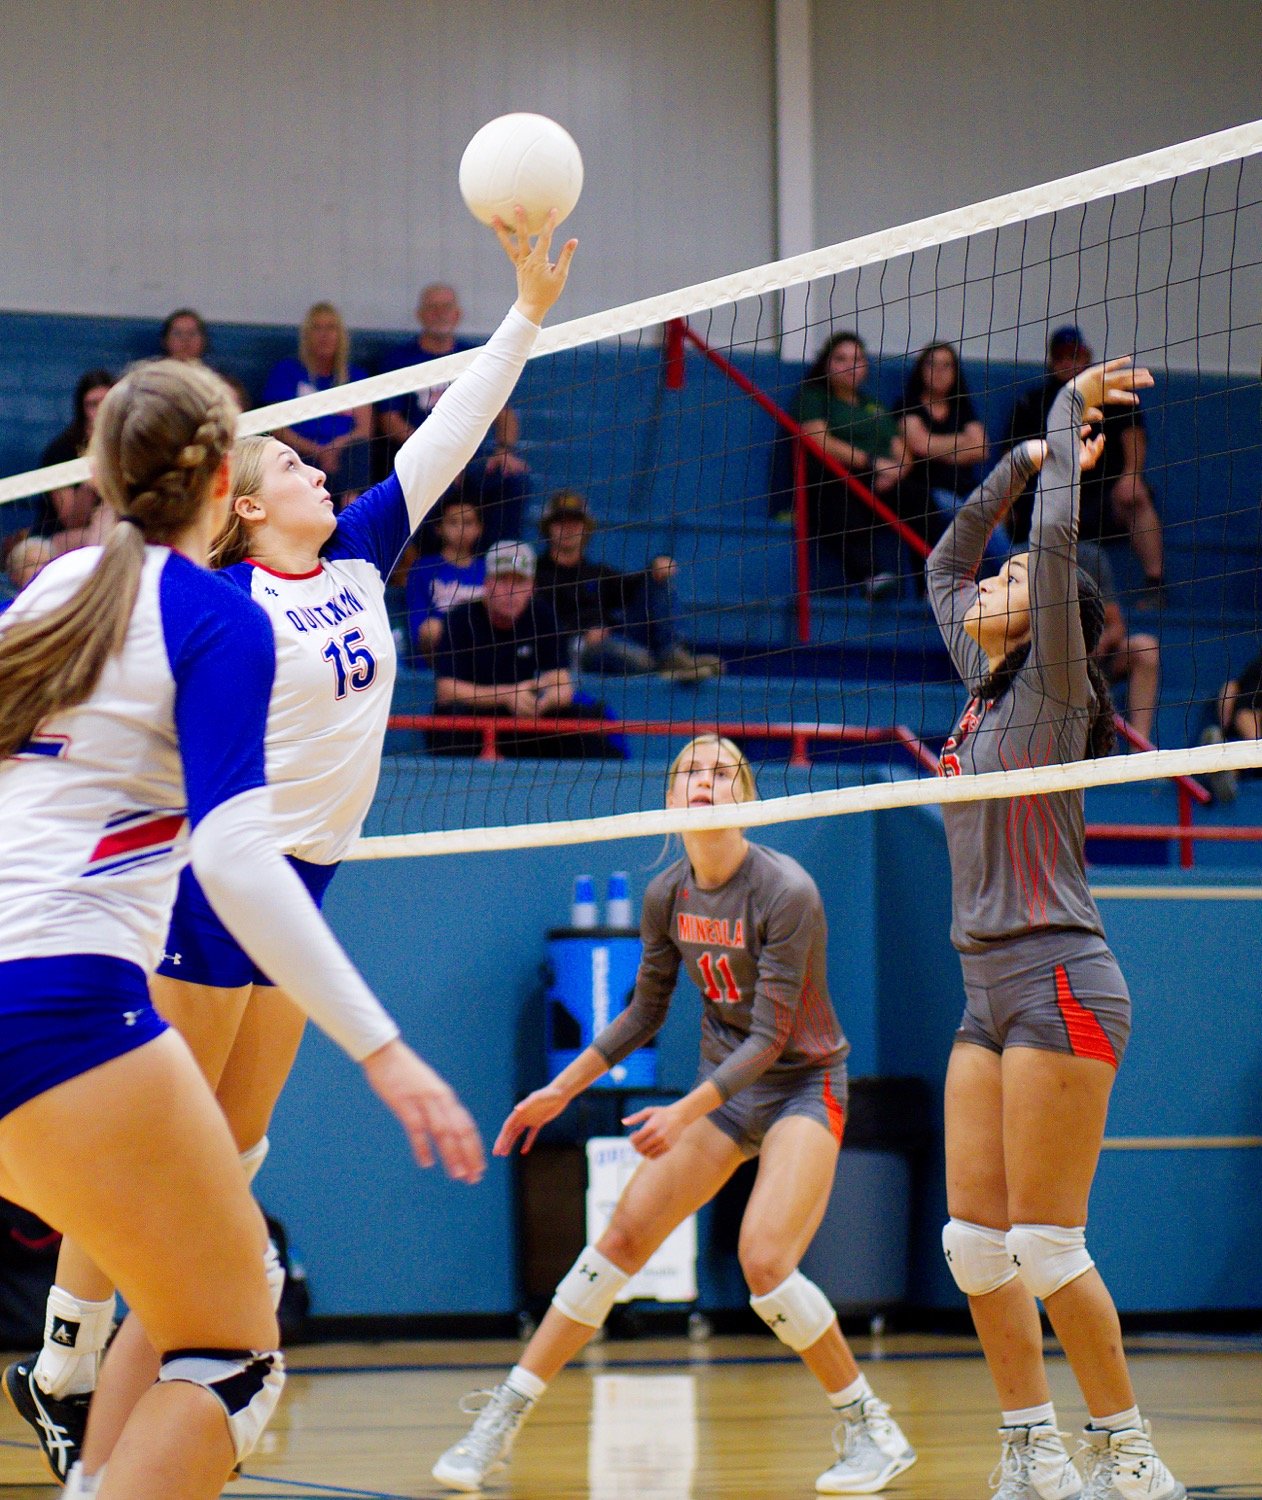 Annabelle Popek tips the ball over the net as Kyra Jackson readies to defend. [view more volleyball shots]